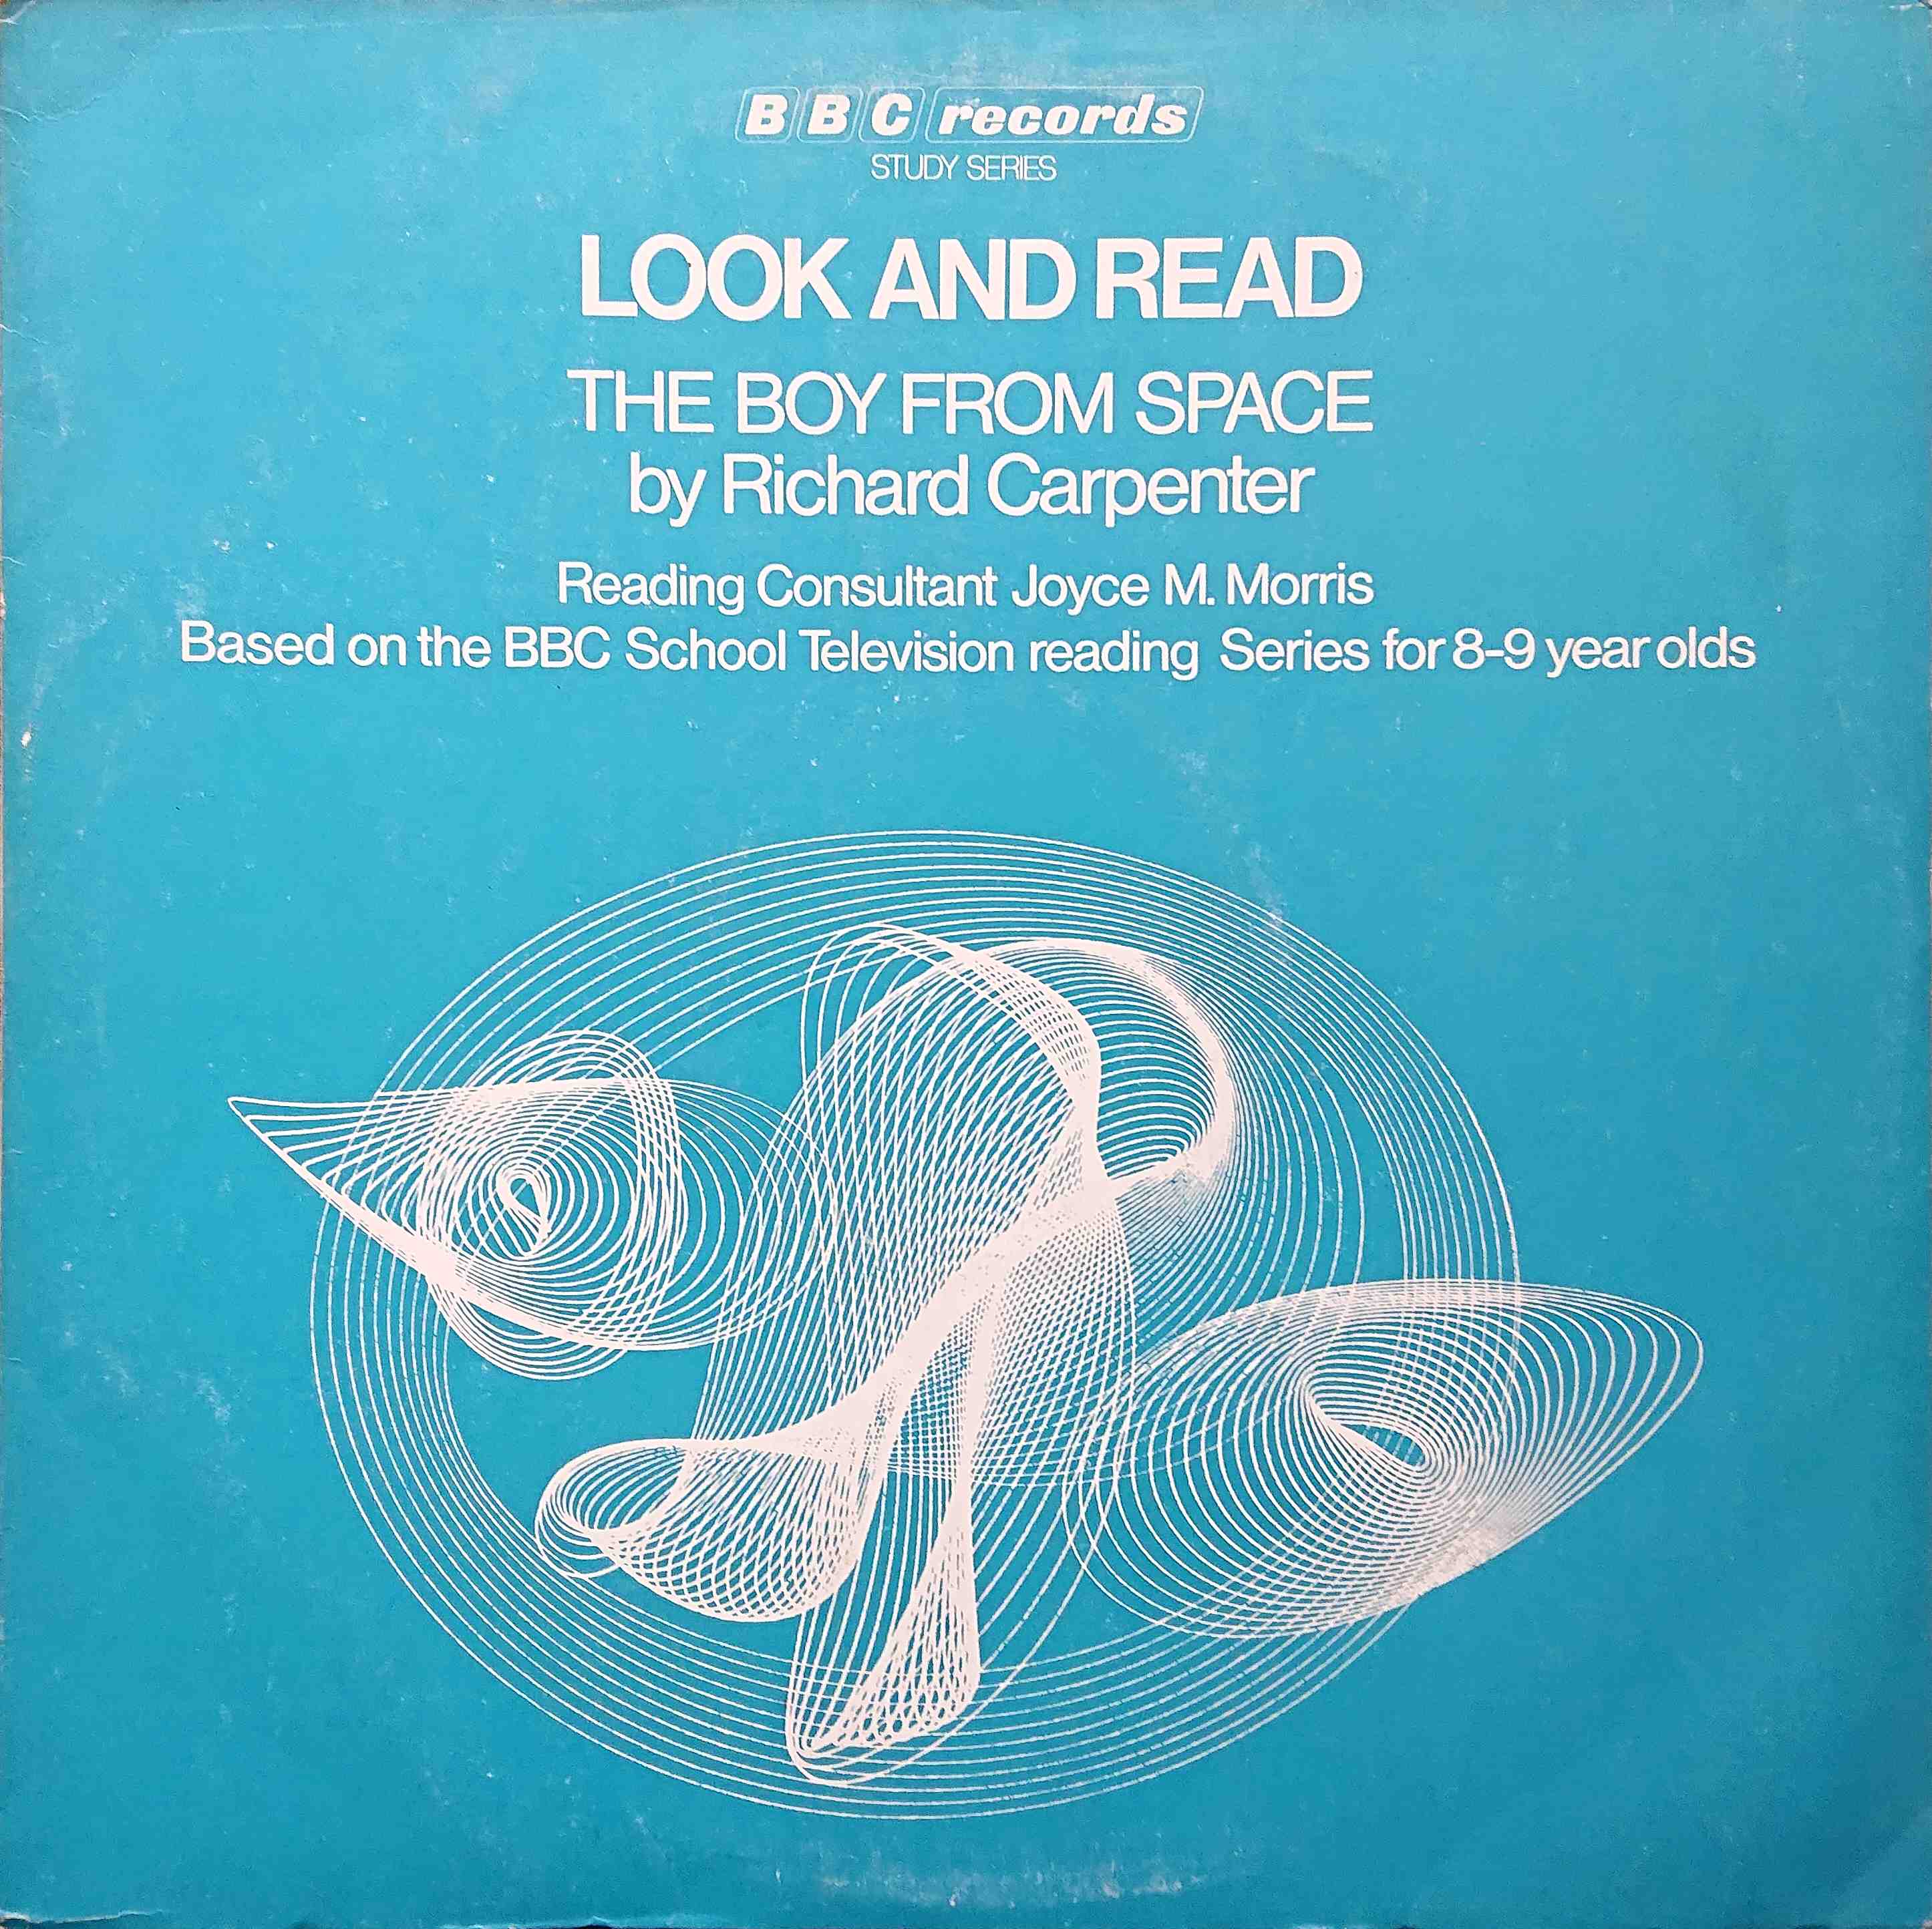 Picture of RESR 30 Look and read - The boy from space  by artist Richard Carpenter from the BBC records and Tapes library